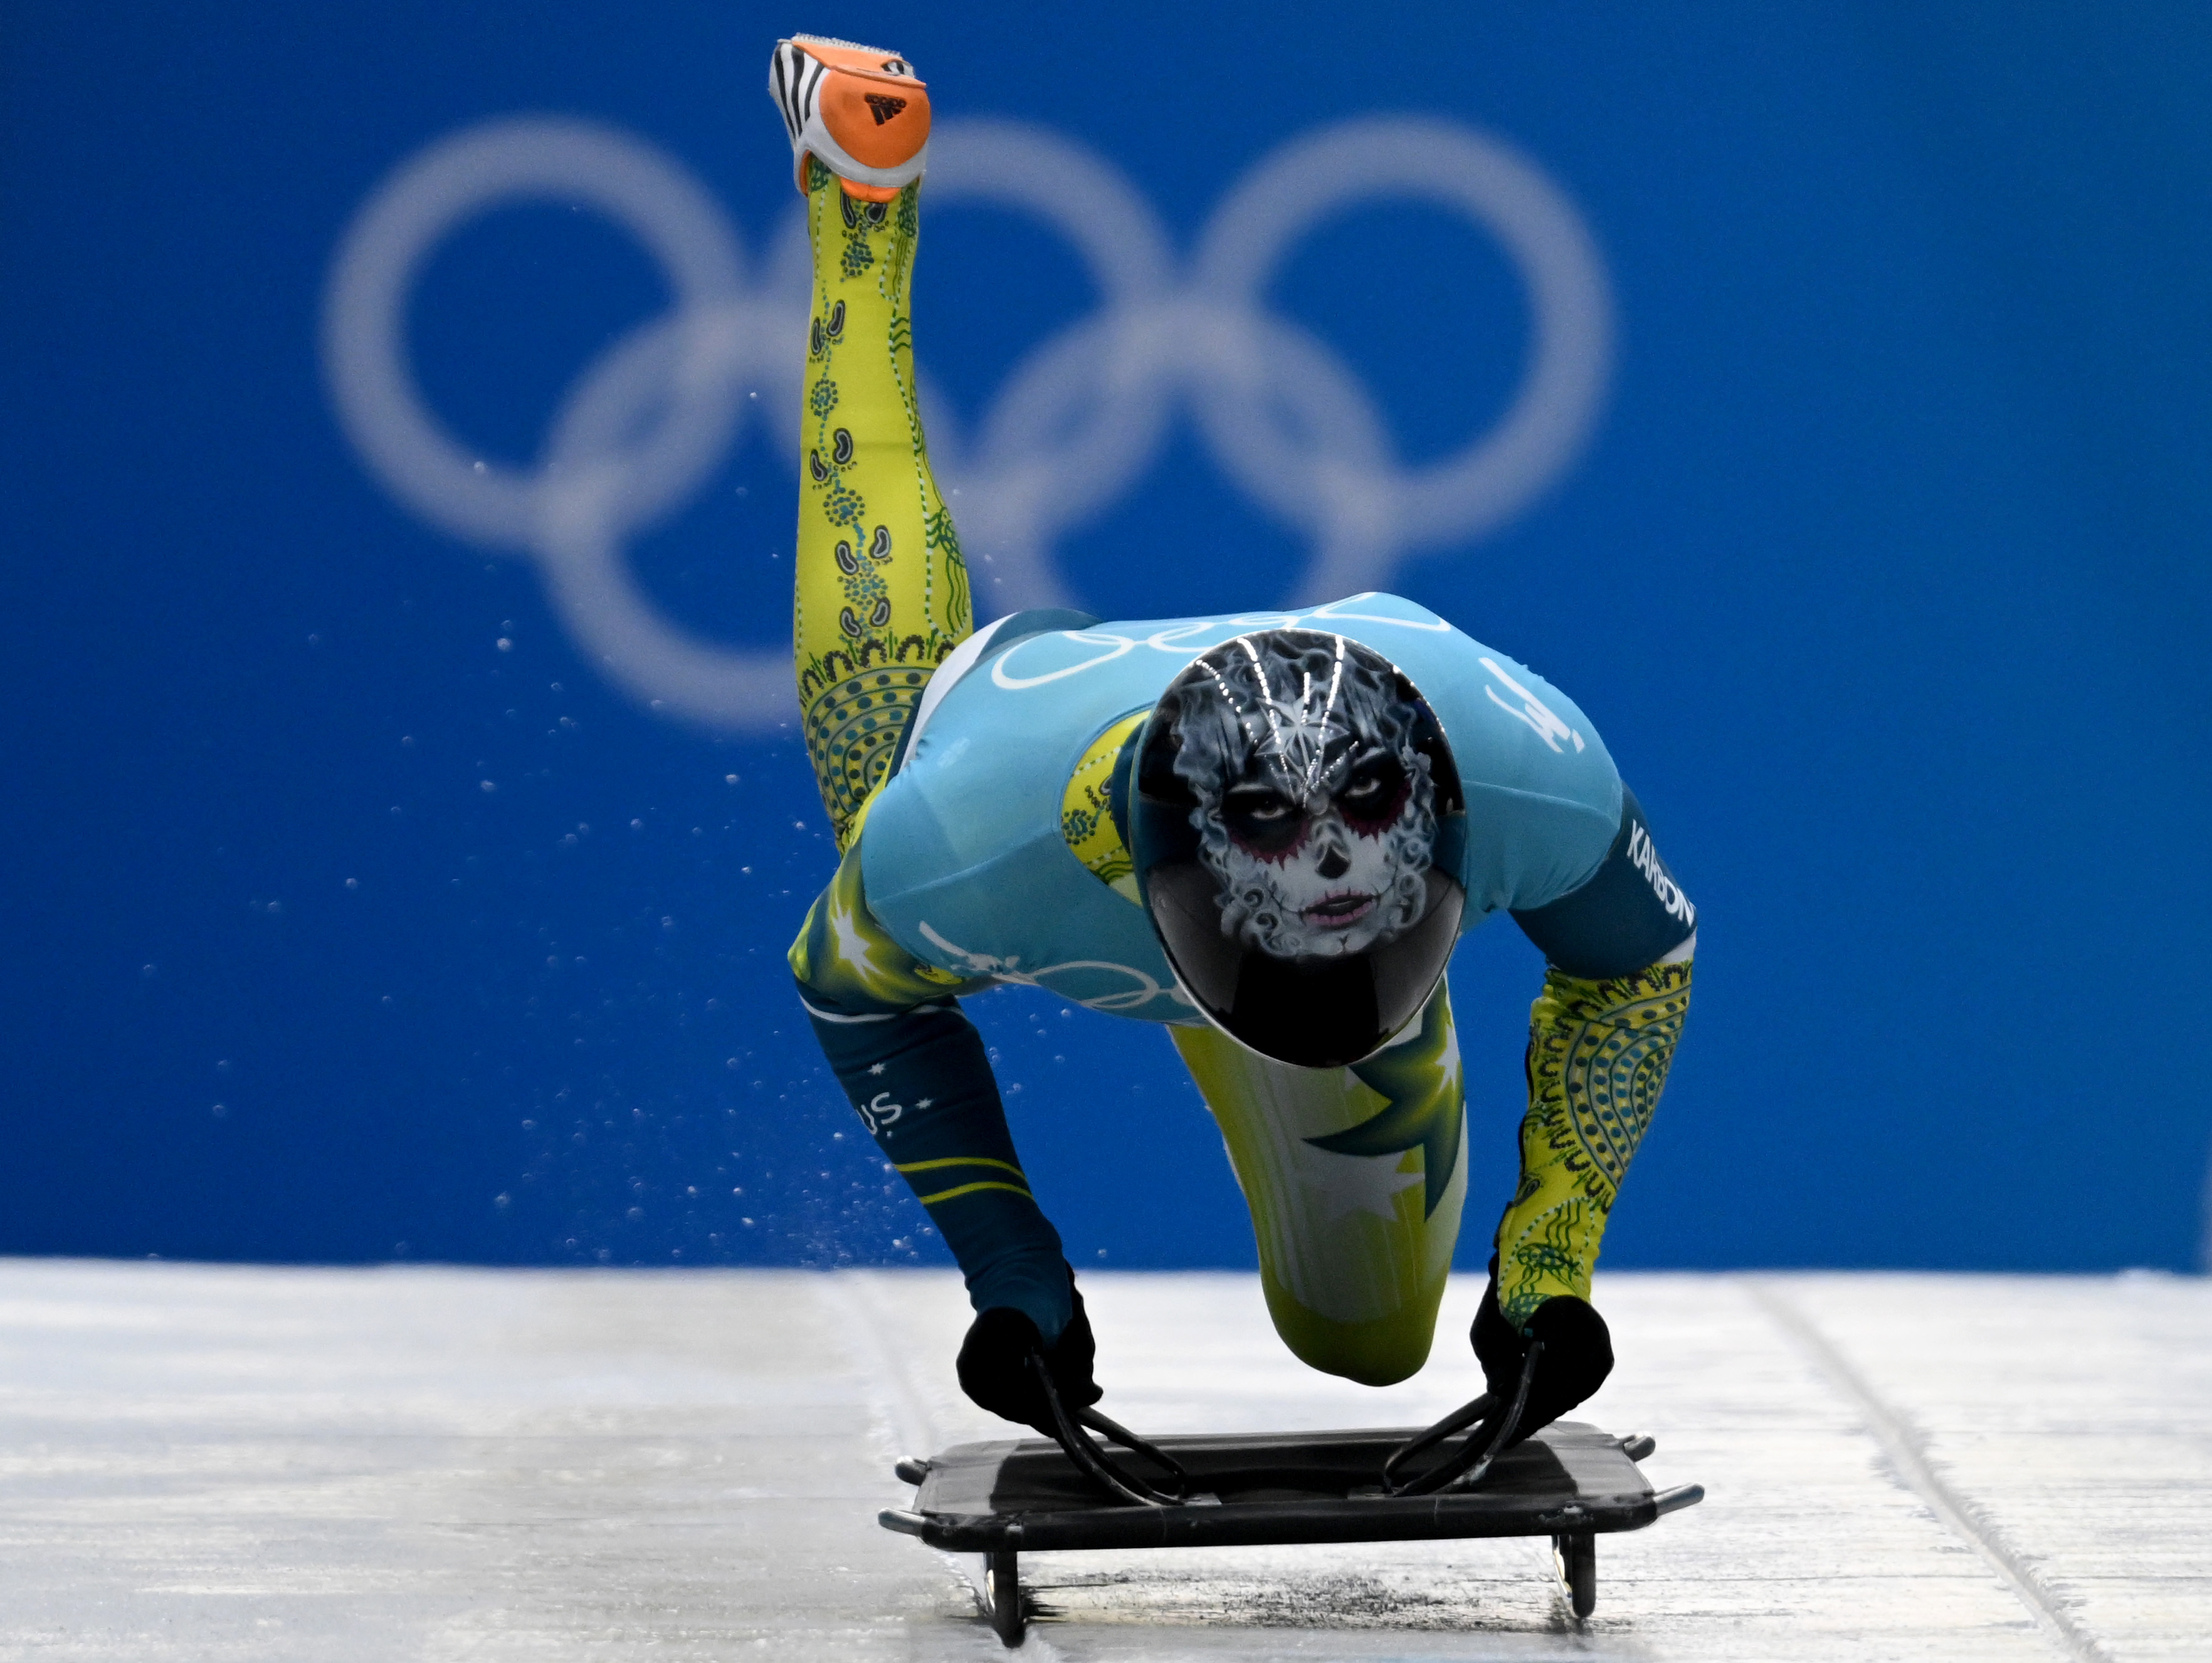 Image of a skeleton racer jumping into a skeleton on ice.